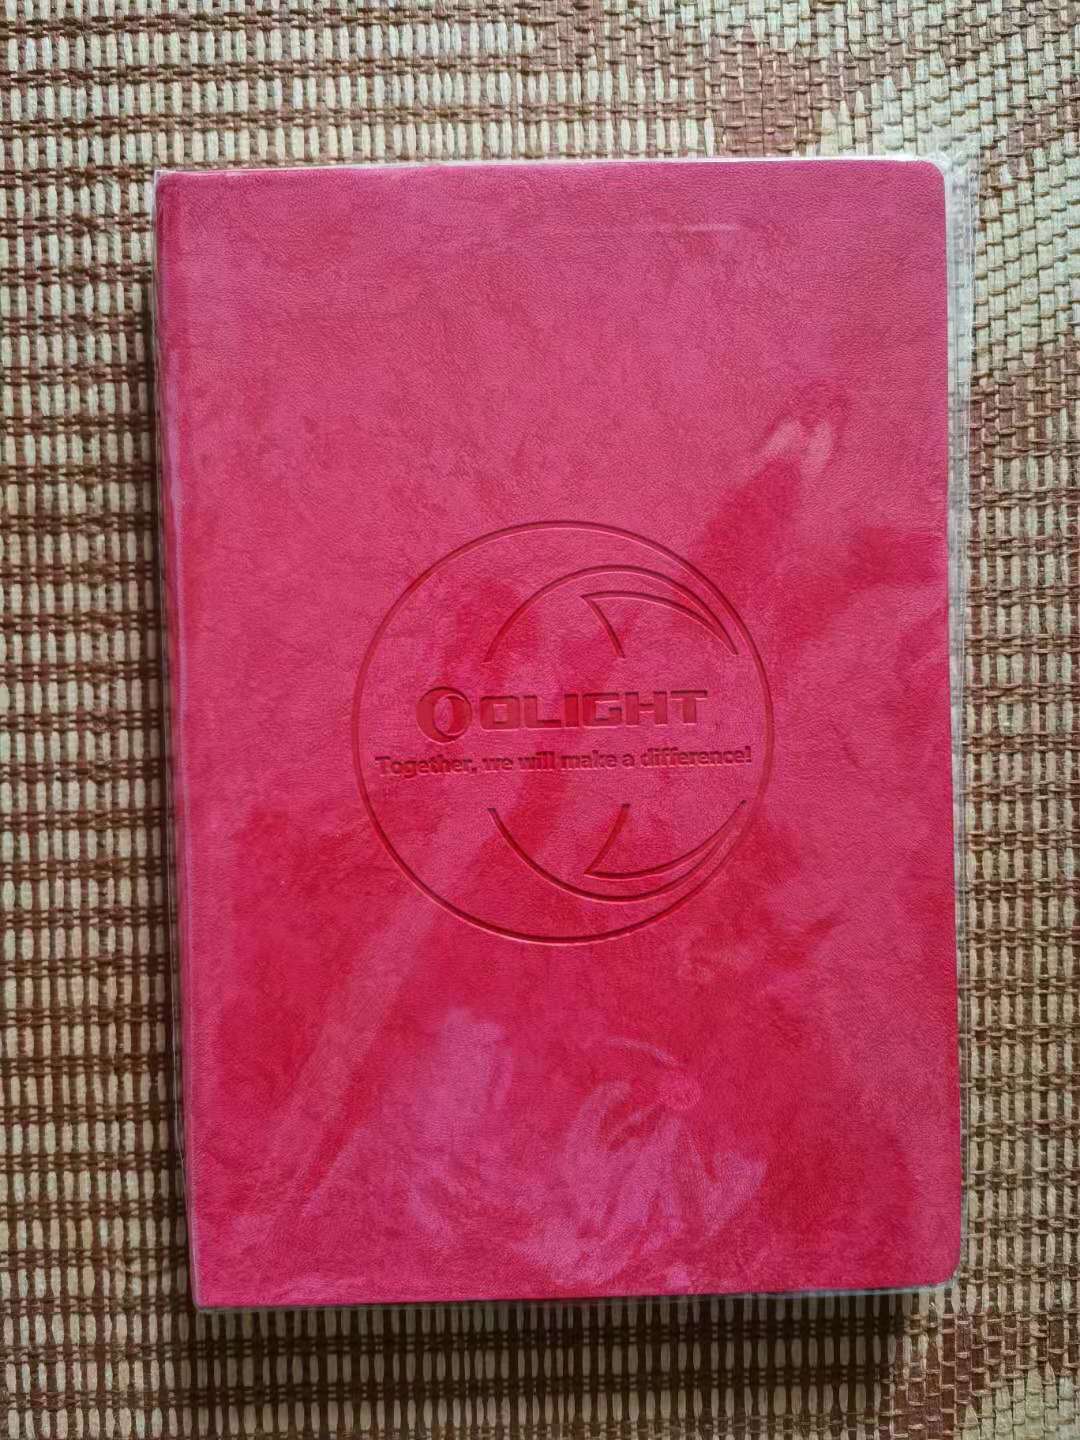 OLIGHT Notebook Limited Edition